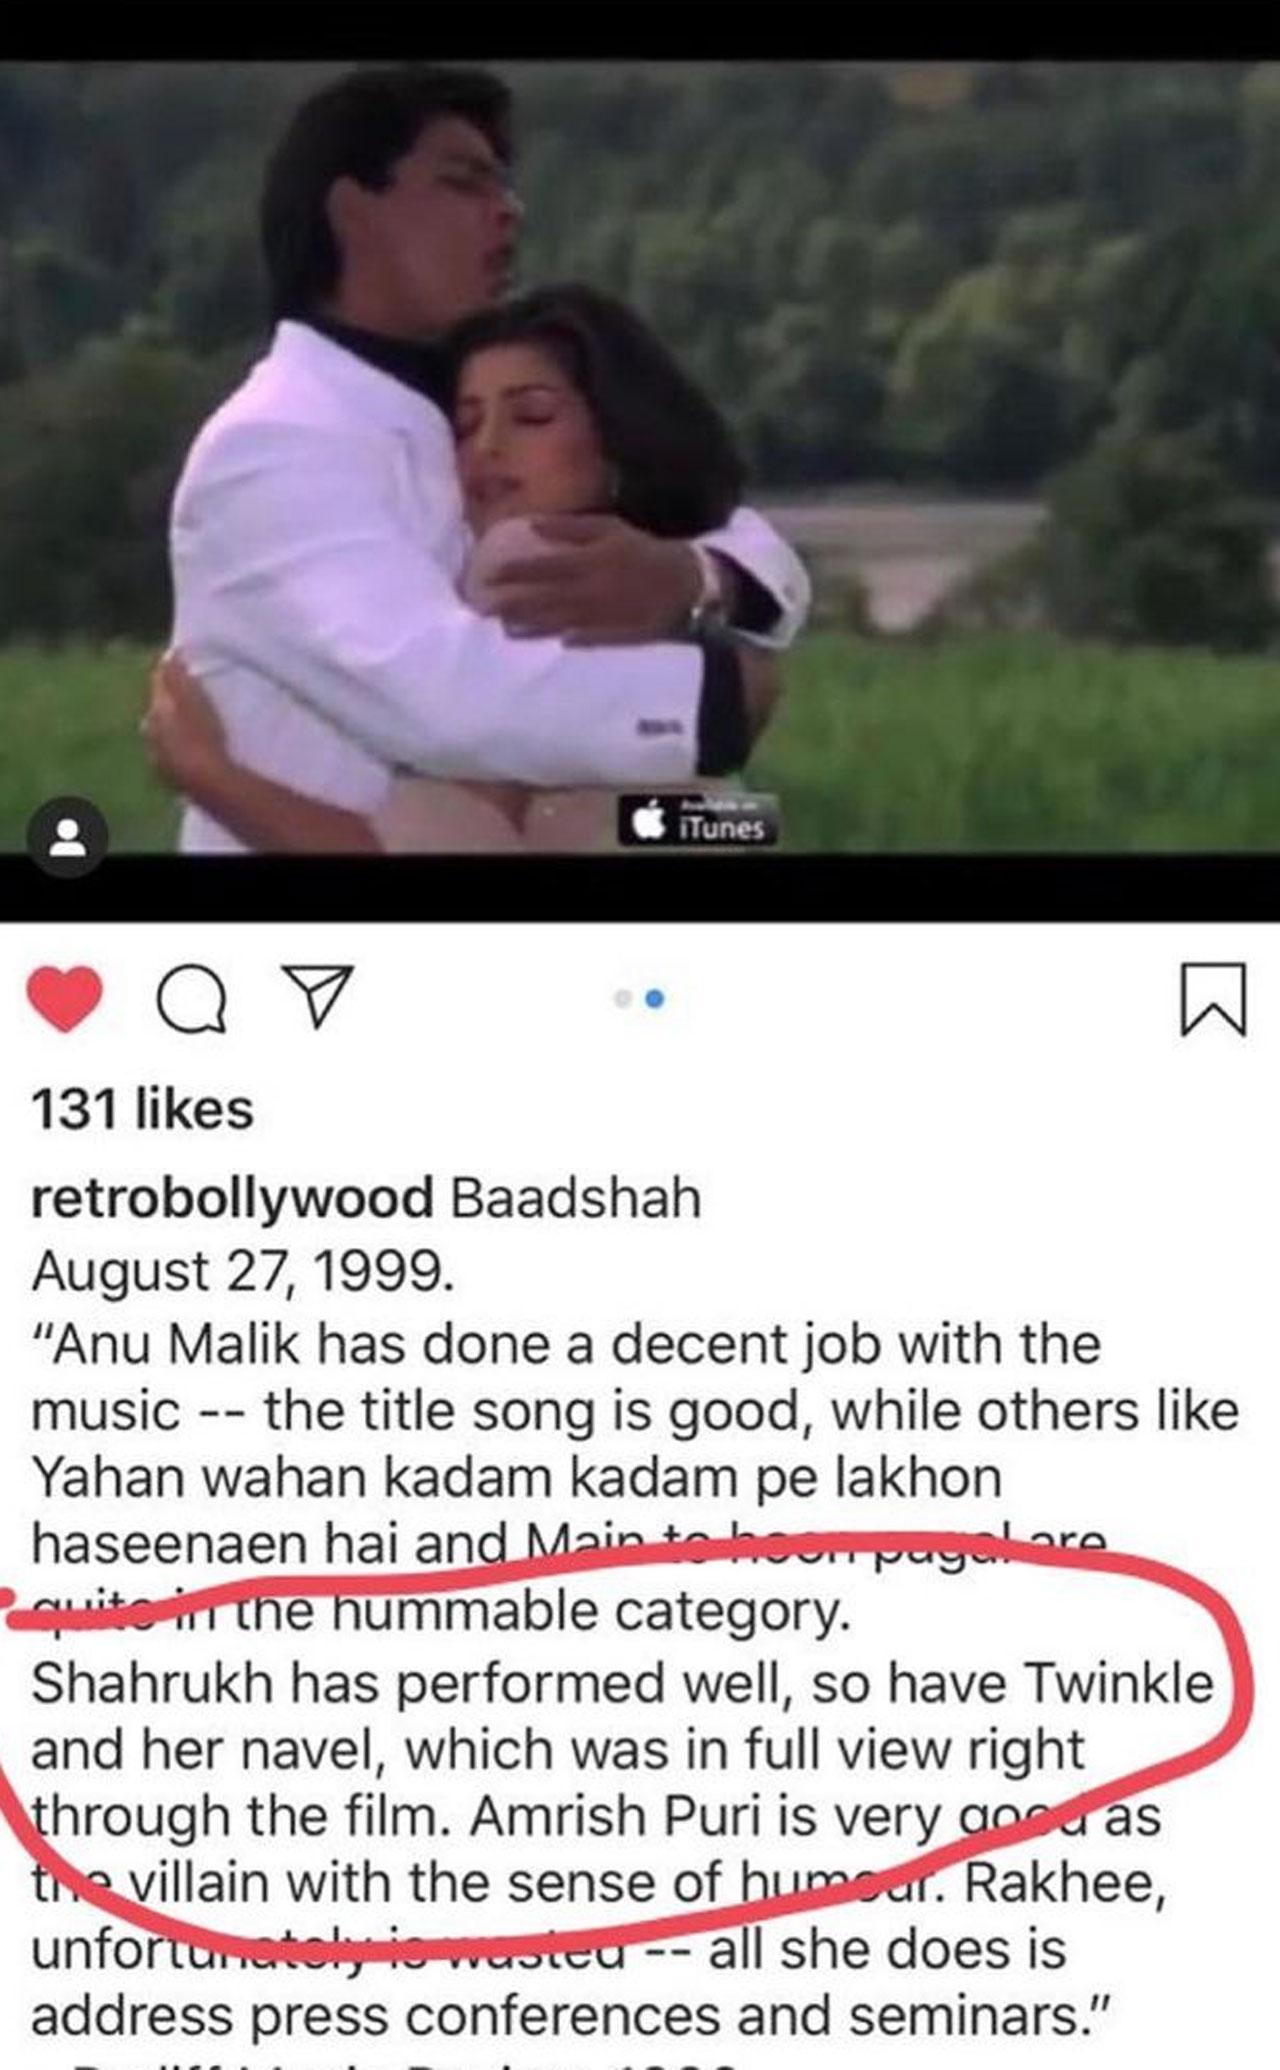 Review of the year
In 1999, the actress shared screen space with Shah Rukh Khan in Abbas-Mustang’s comic thriller Baadshah. Sharing a screenshot of one of the reviews that praised her navel, Twinkle exclaimed this, 